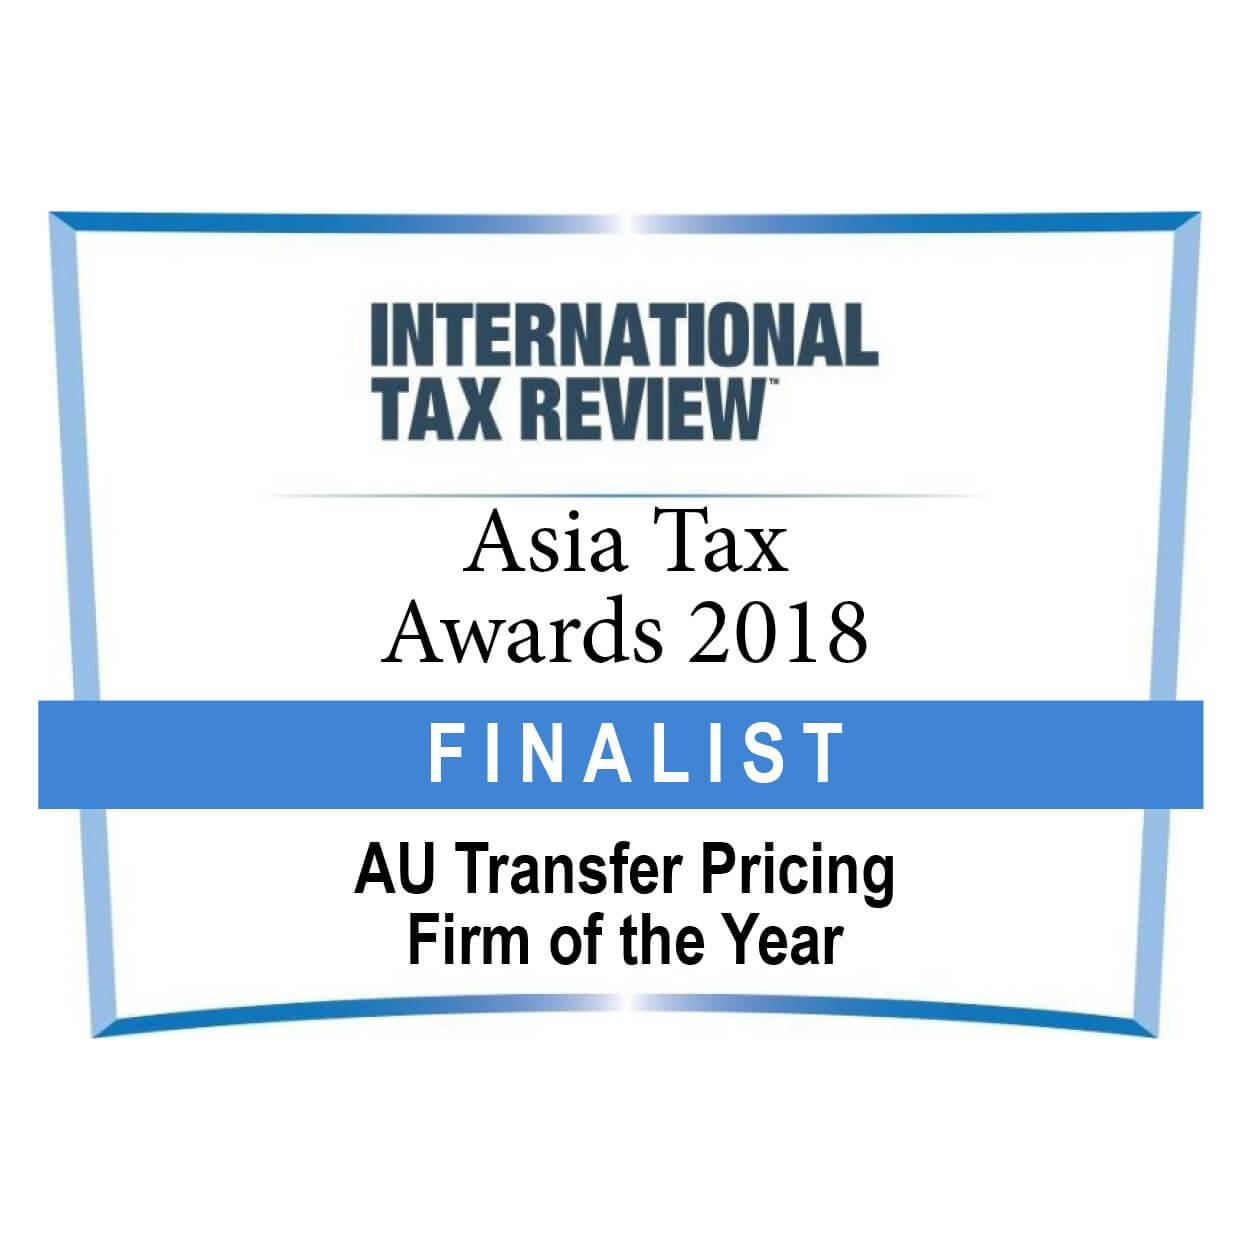 AU TP firm of the Year Asia Tax Awards FINALIST 2018